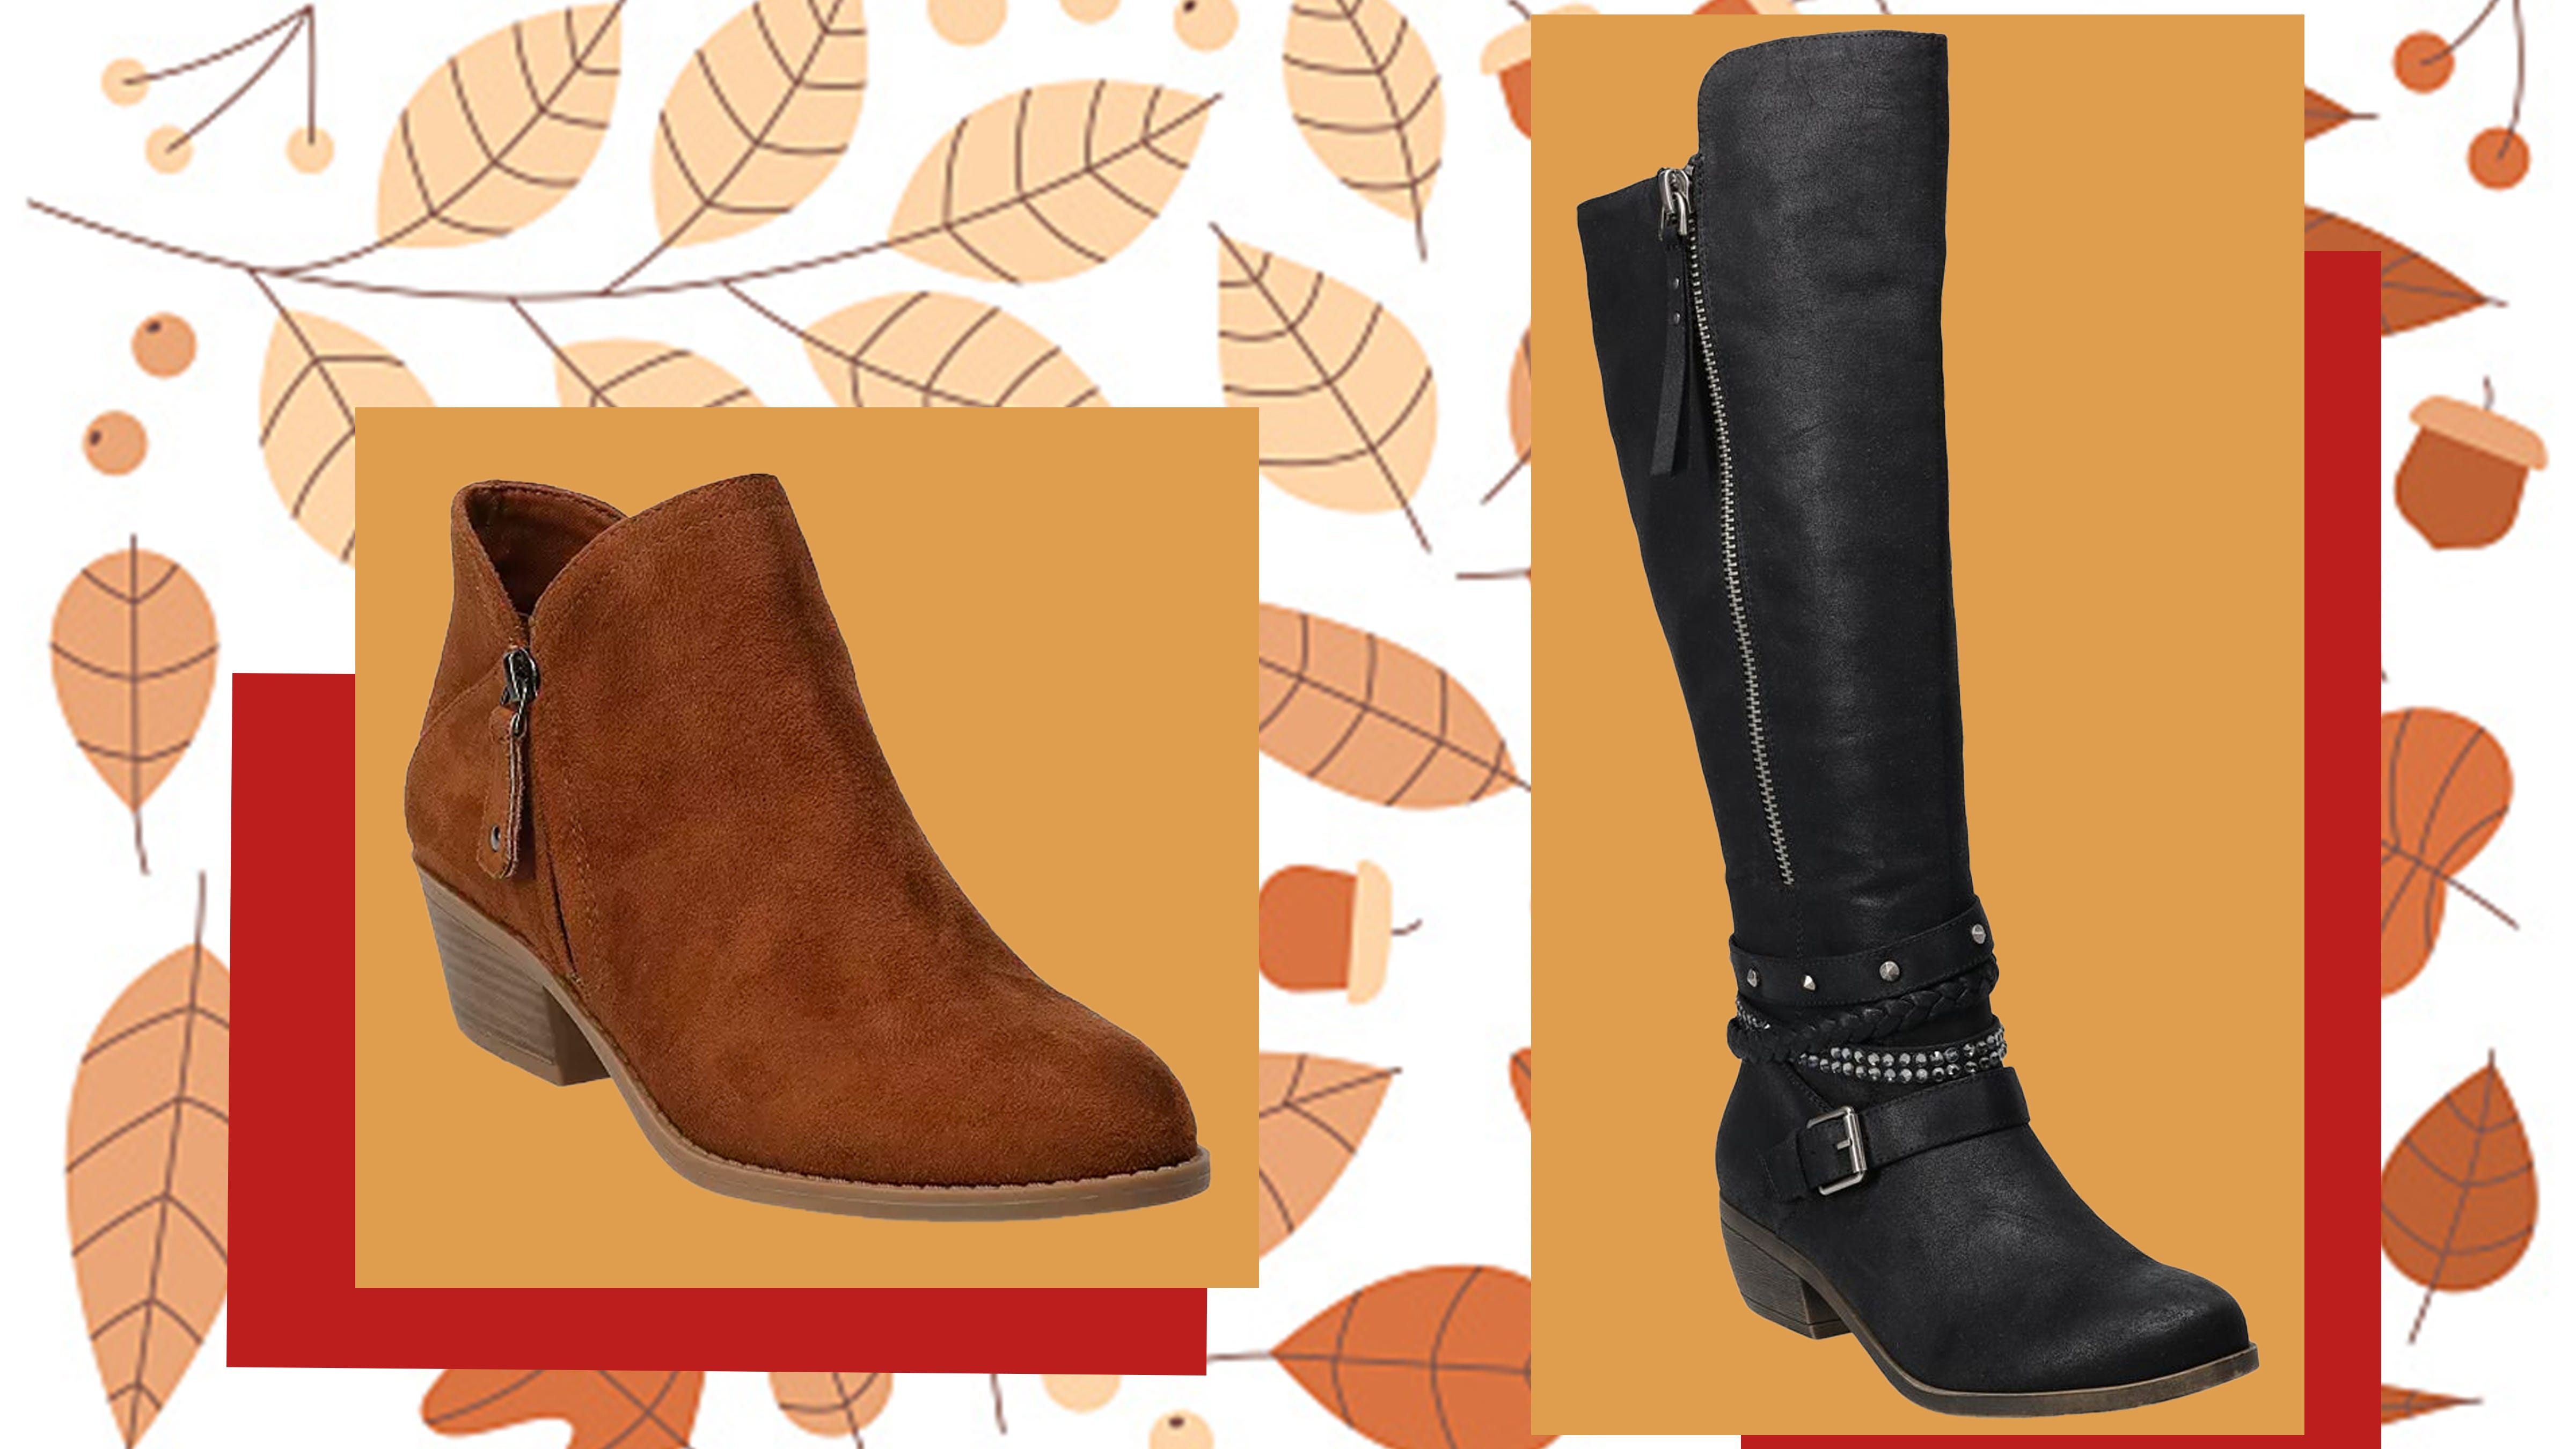 Shop women's boots on sale for $20 this 